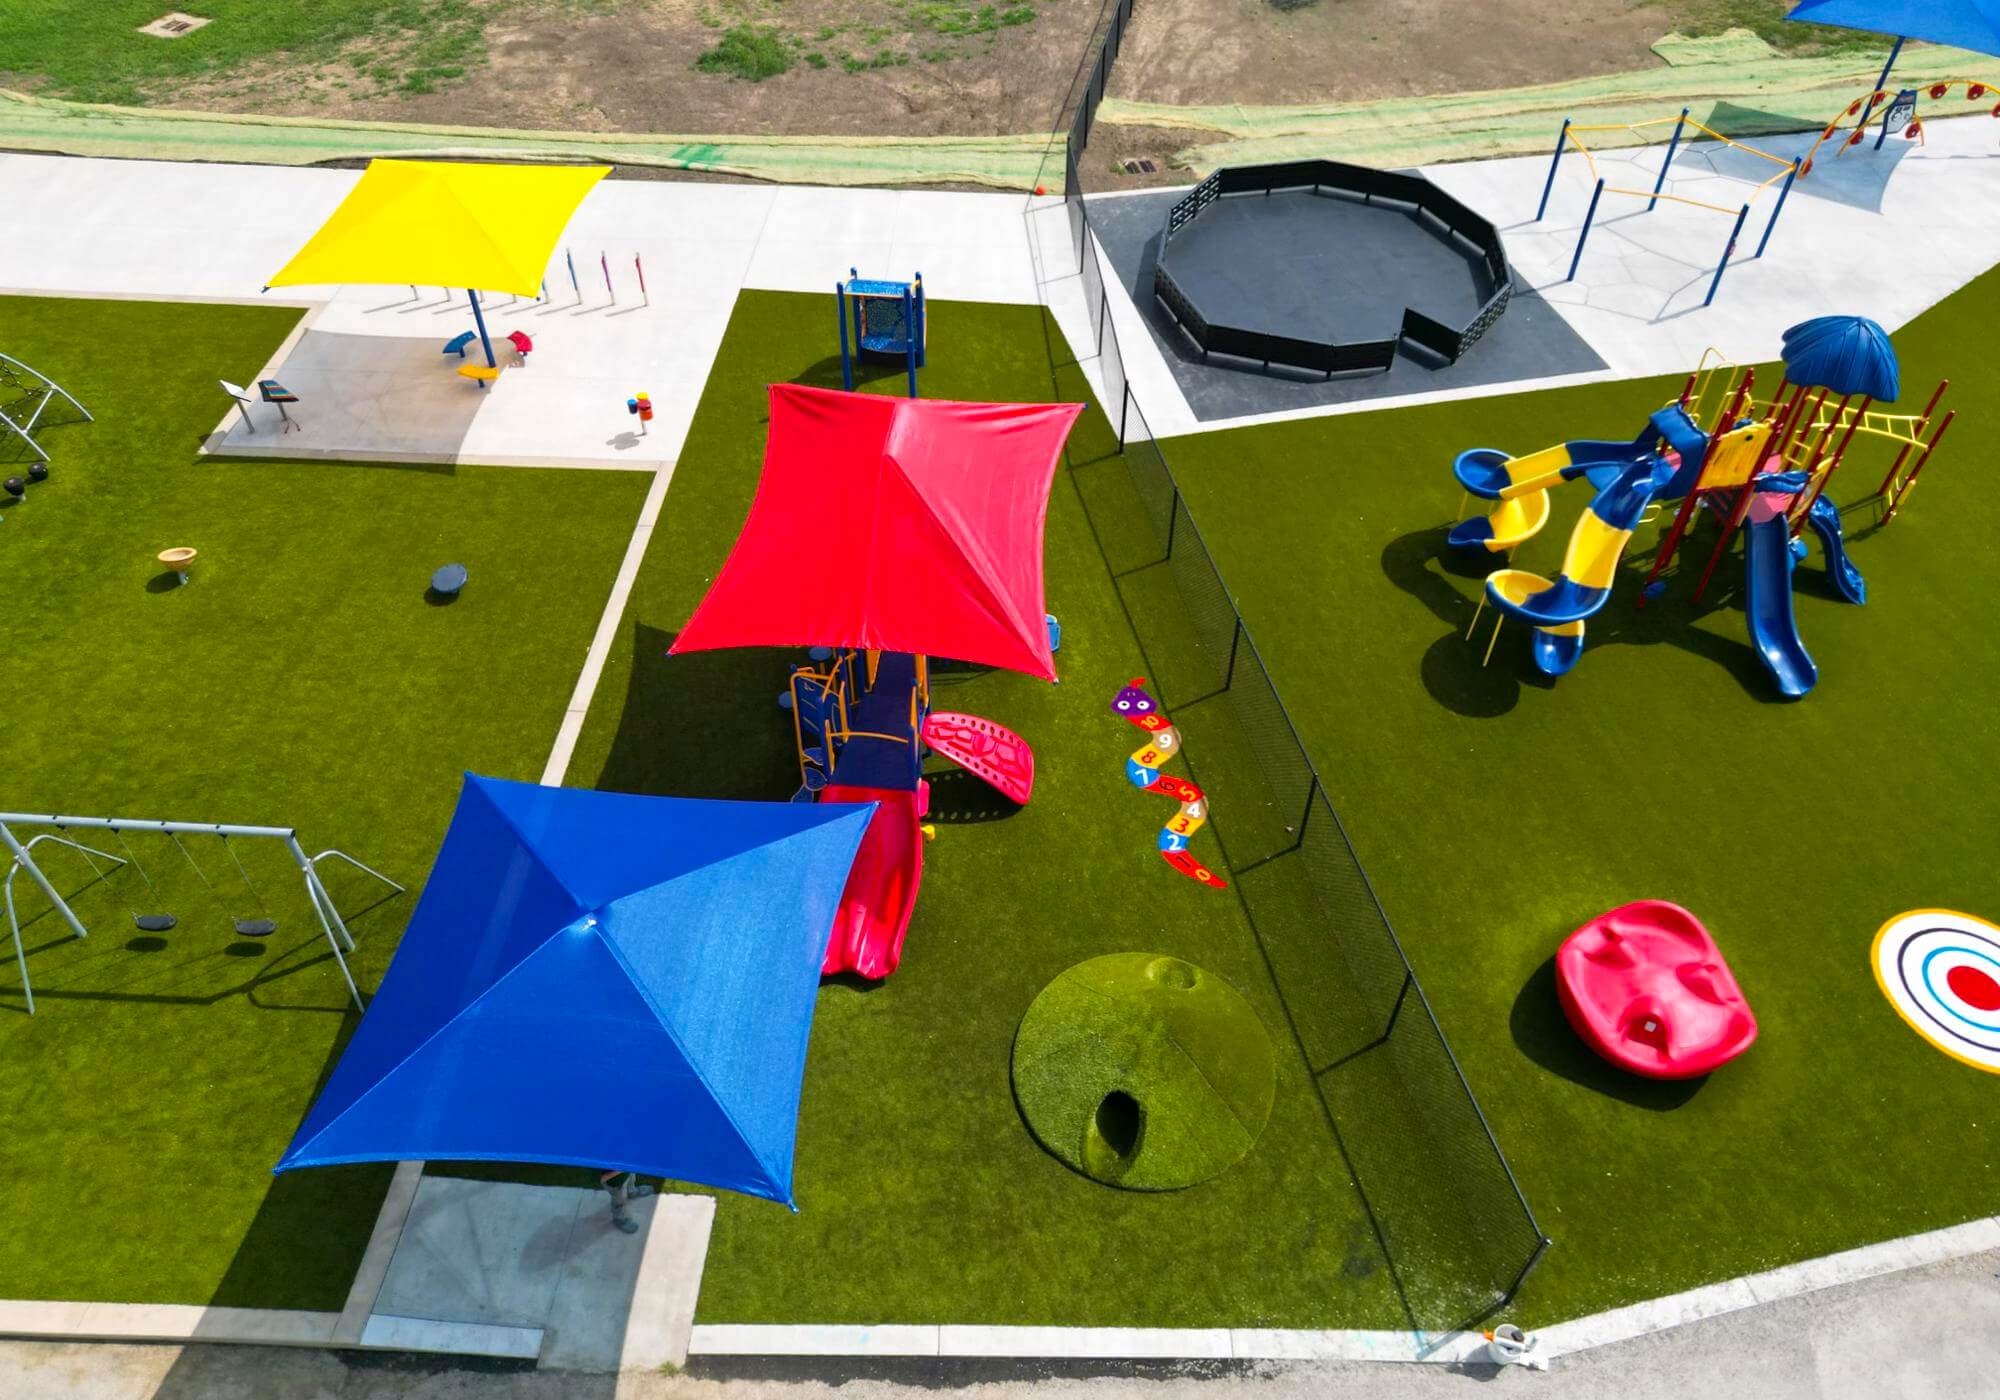 An aerial view of a playground with various play structures, and bright sunshades, surrounded by a green field.